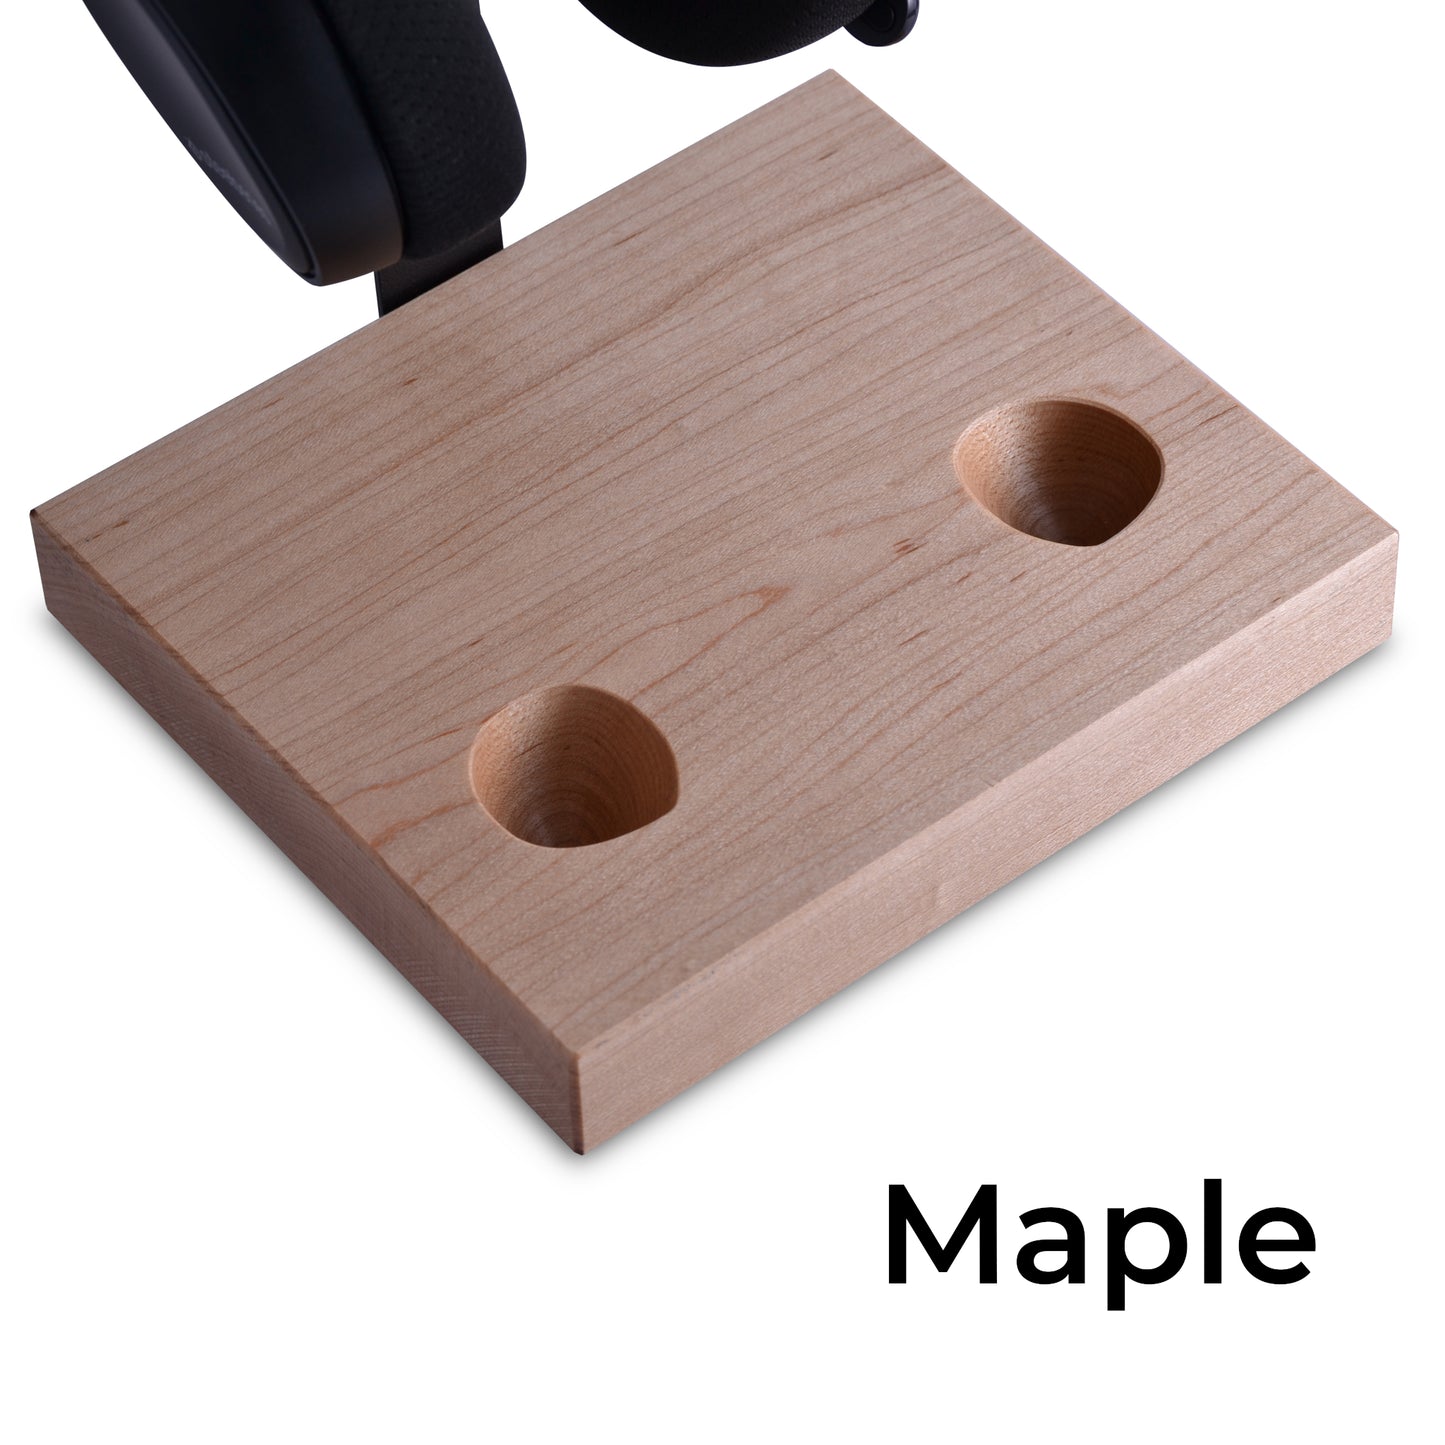 Maple version of headset and controller stand for Xbox series X|S Controller